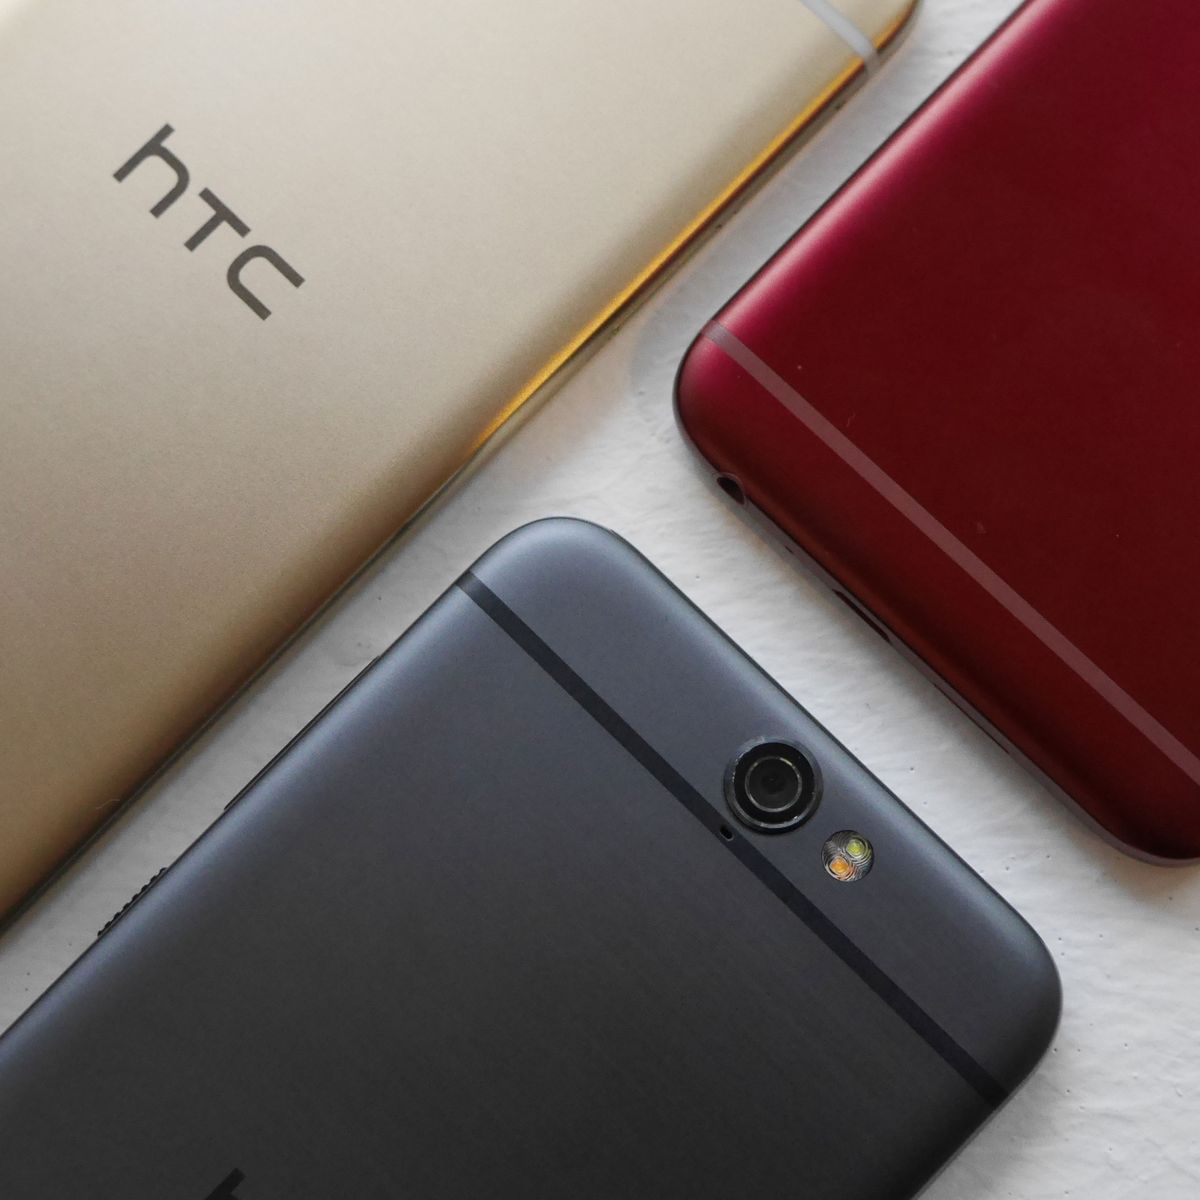 HTC One M10 release date, rumours, news, specs, price and